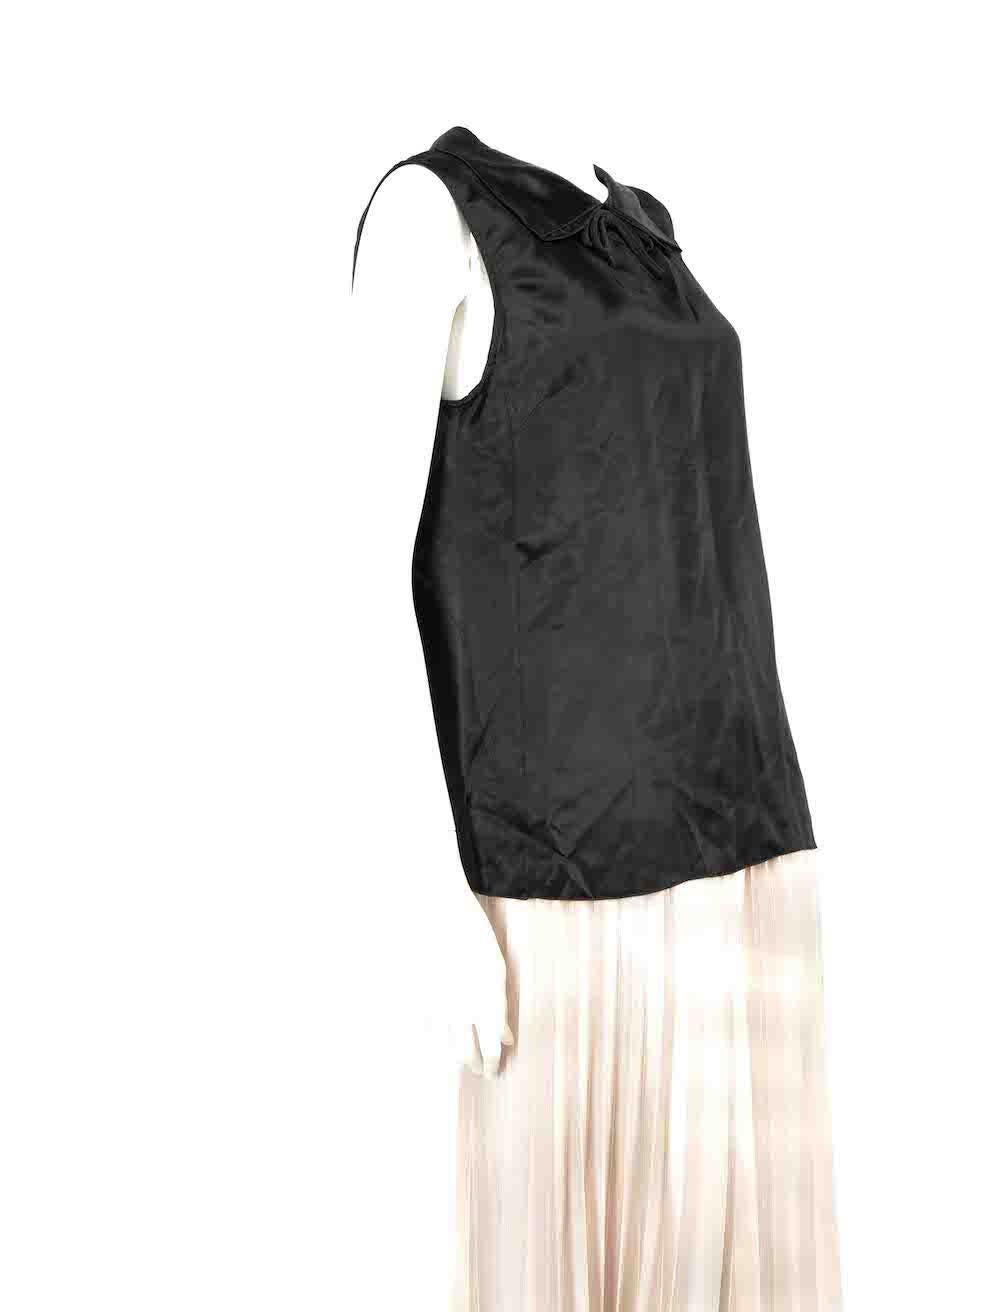 CONDITION is Very good. Hardly any visible wear to top is evident on this used Marni designer resale item.
 
 Details
 Winter 2011
 Black
 Synthetic
 Sleeveless top
 Round neckline
 Bow accent
 Collared
 Back keyhole neckline with button closure
 
